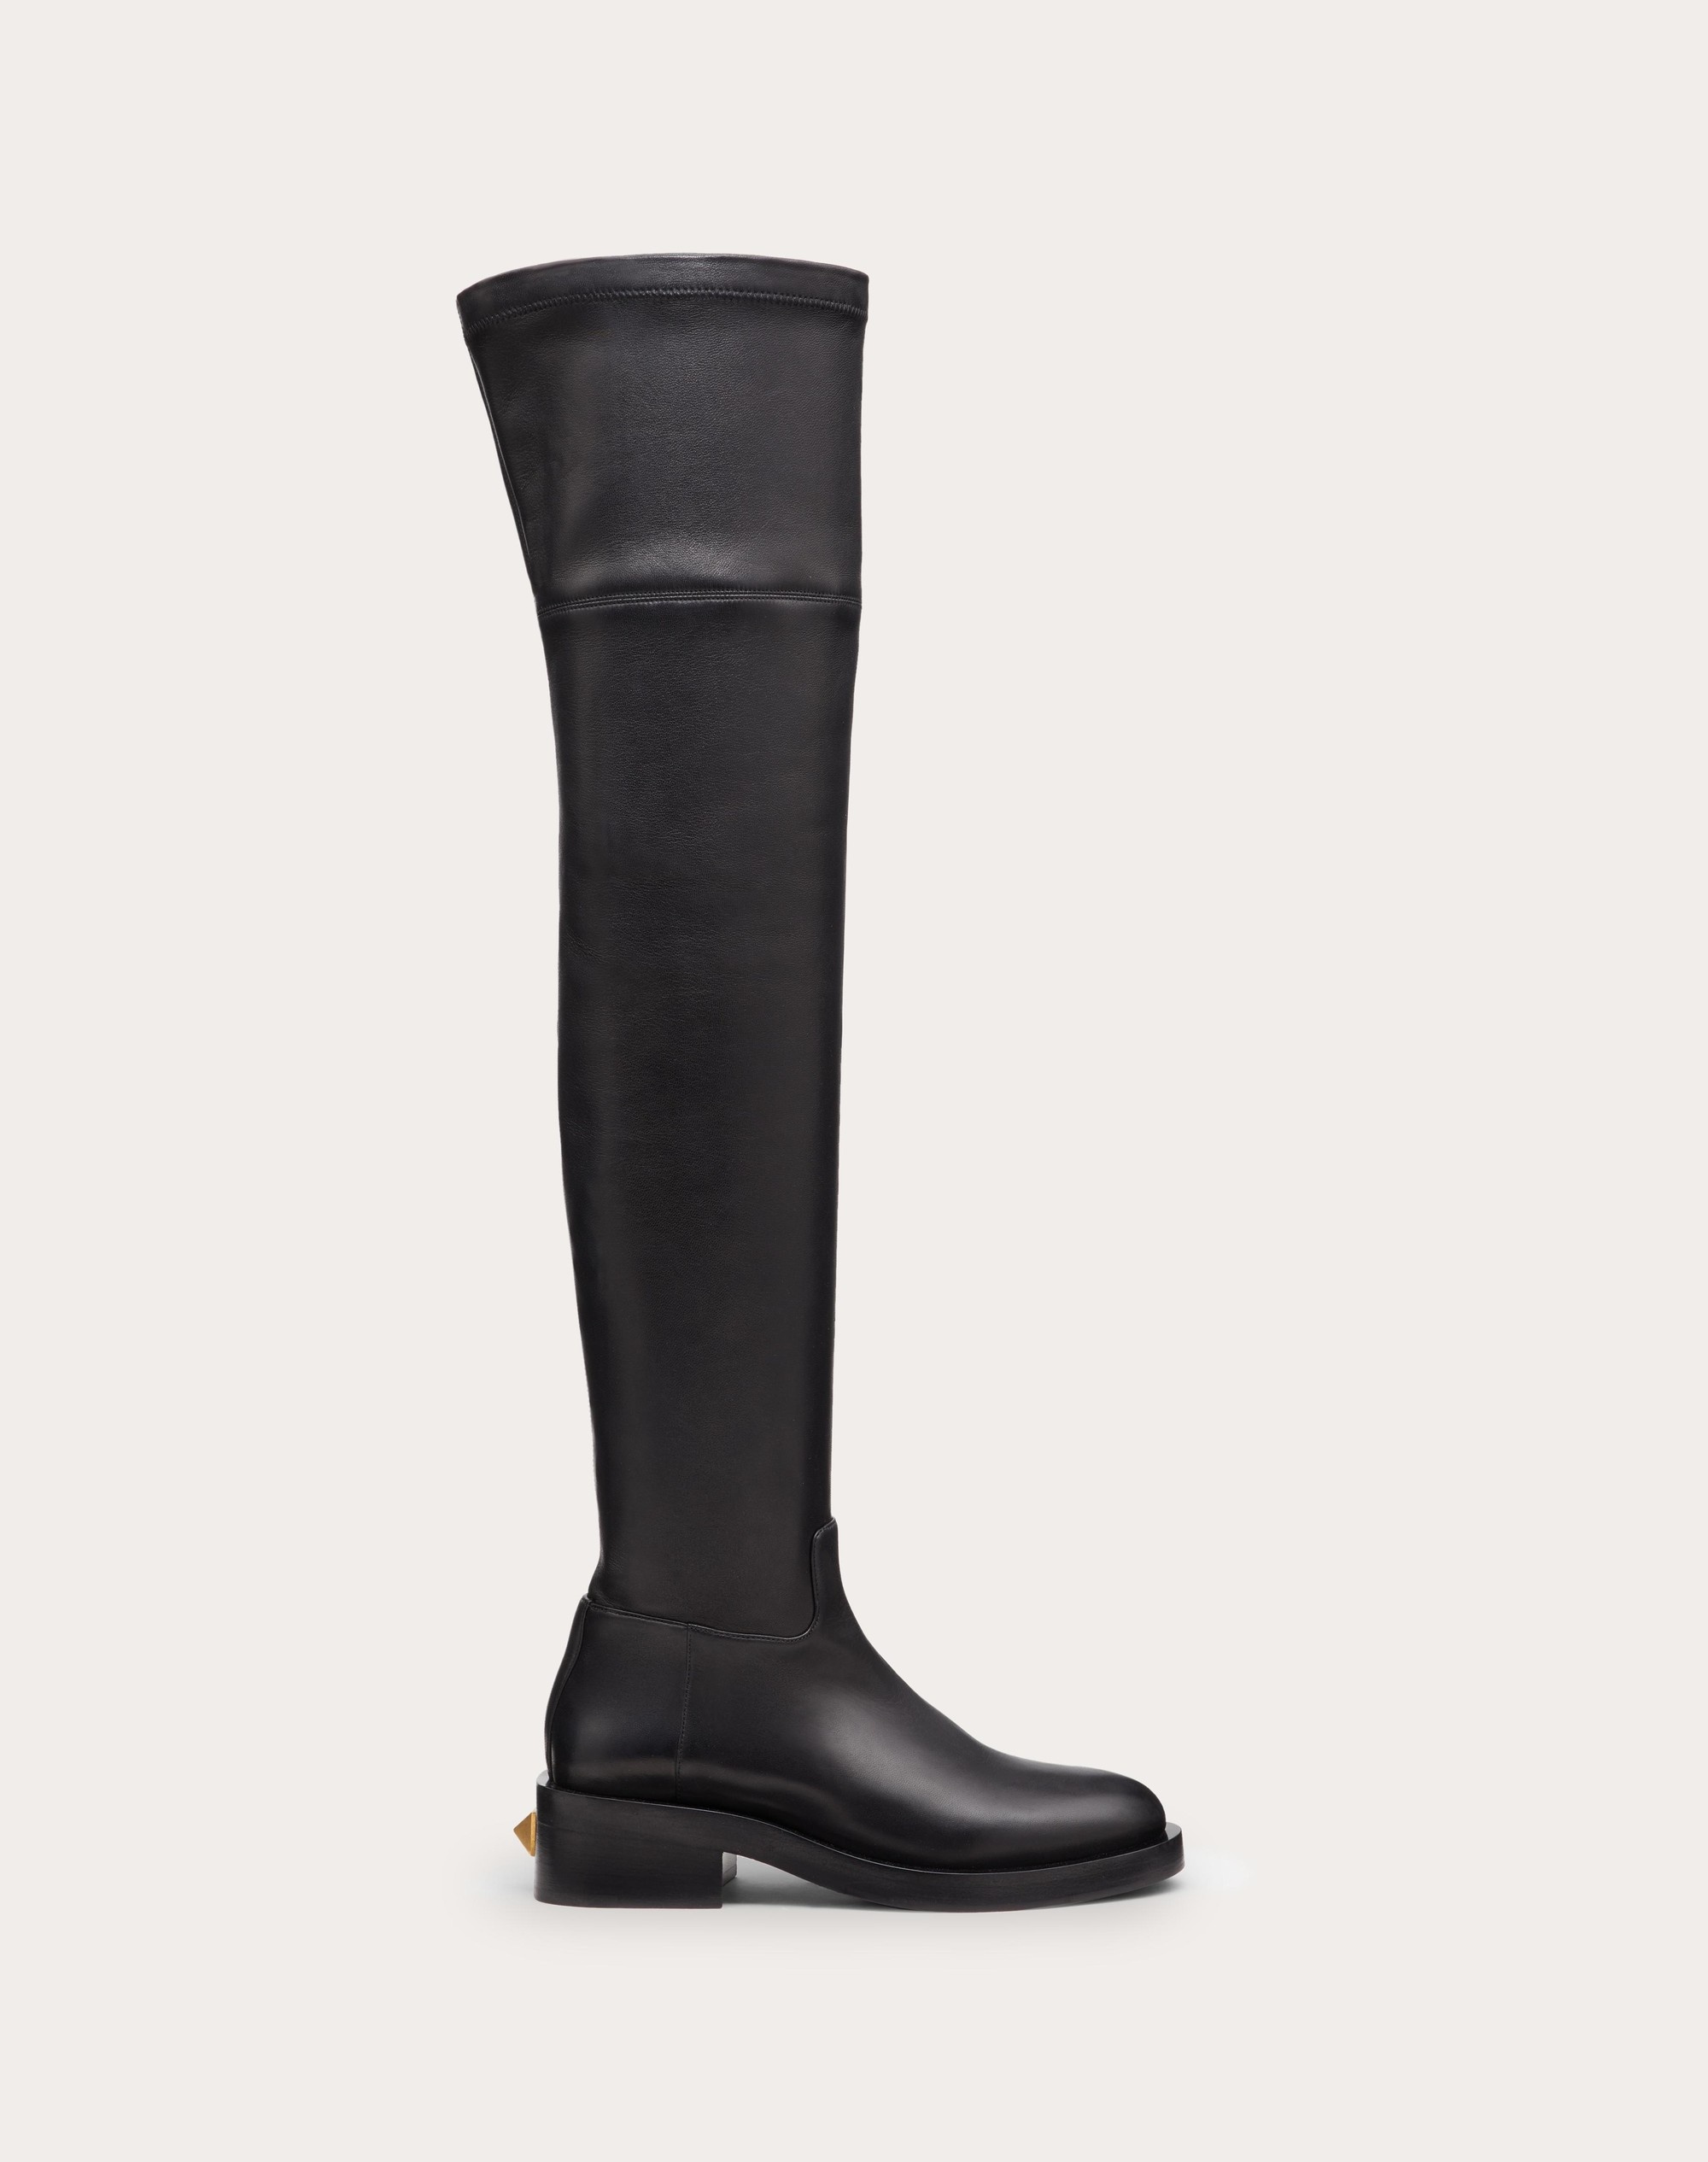 ROMAN STUD STRETCH NAPPA OVER-THE-KNEE BOOT 30MM - 1